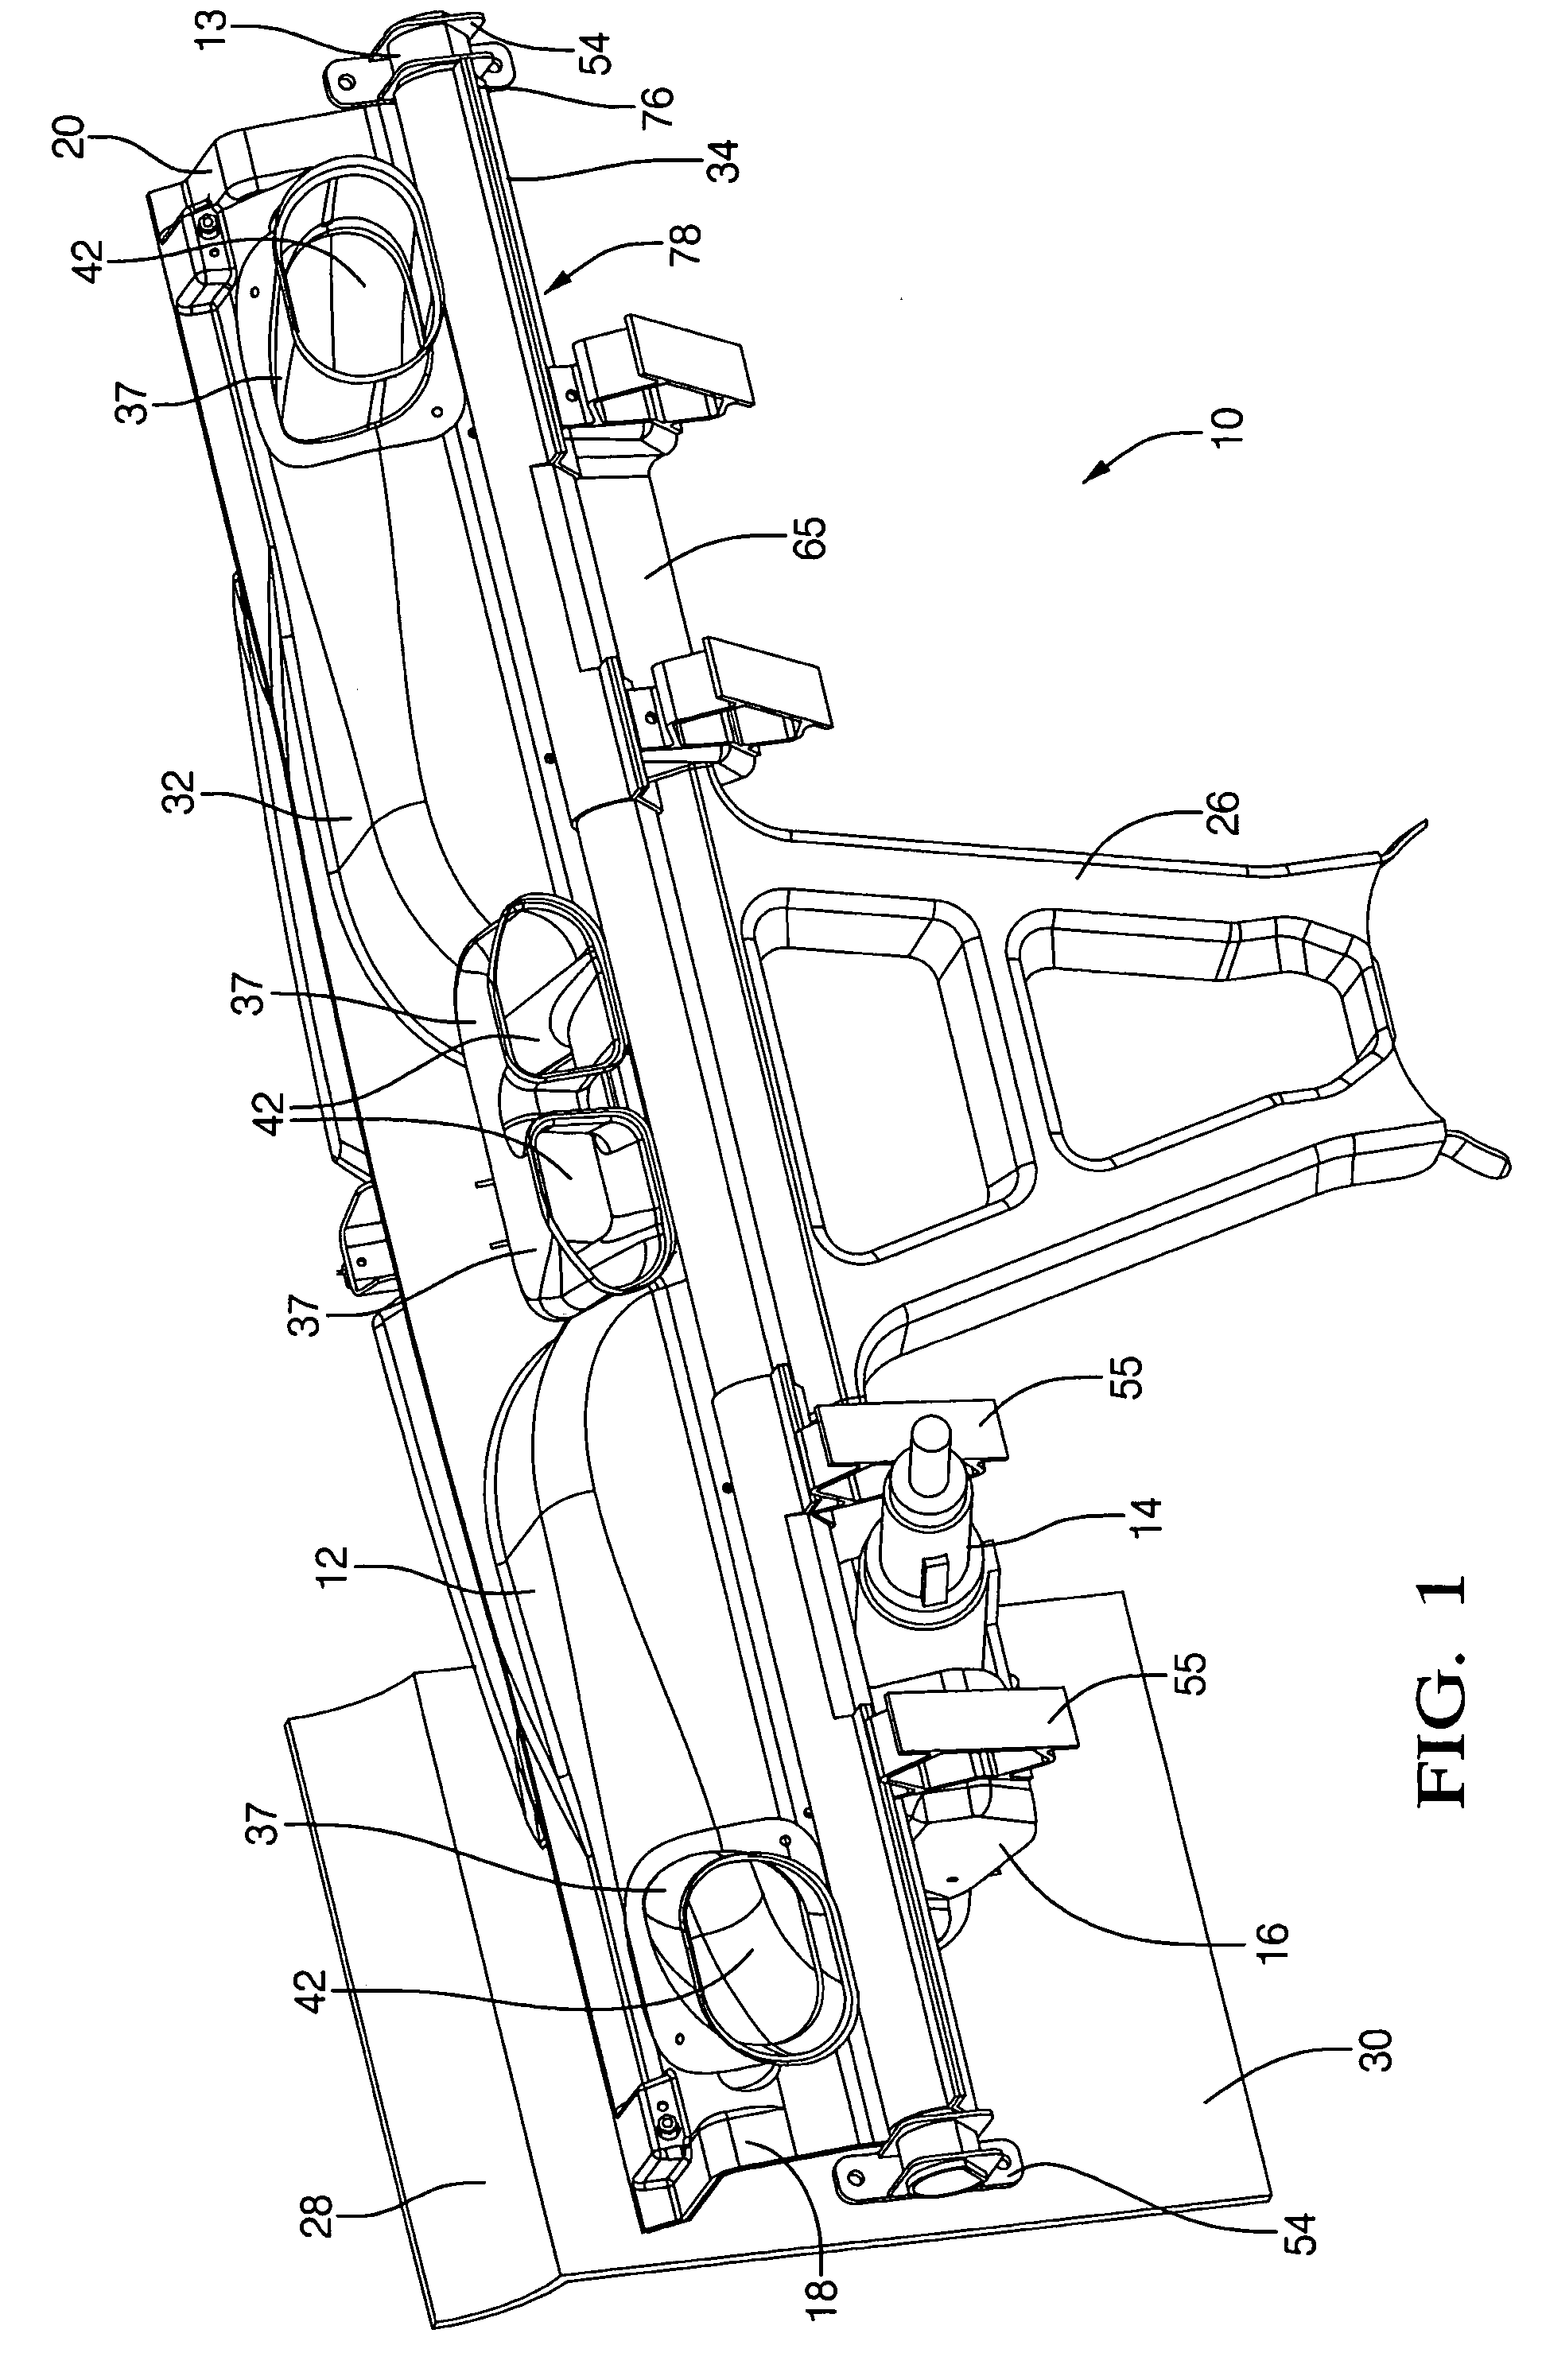 Structural hybrid attachment system and method